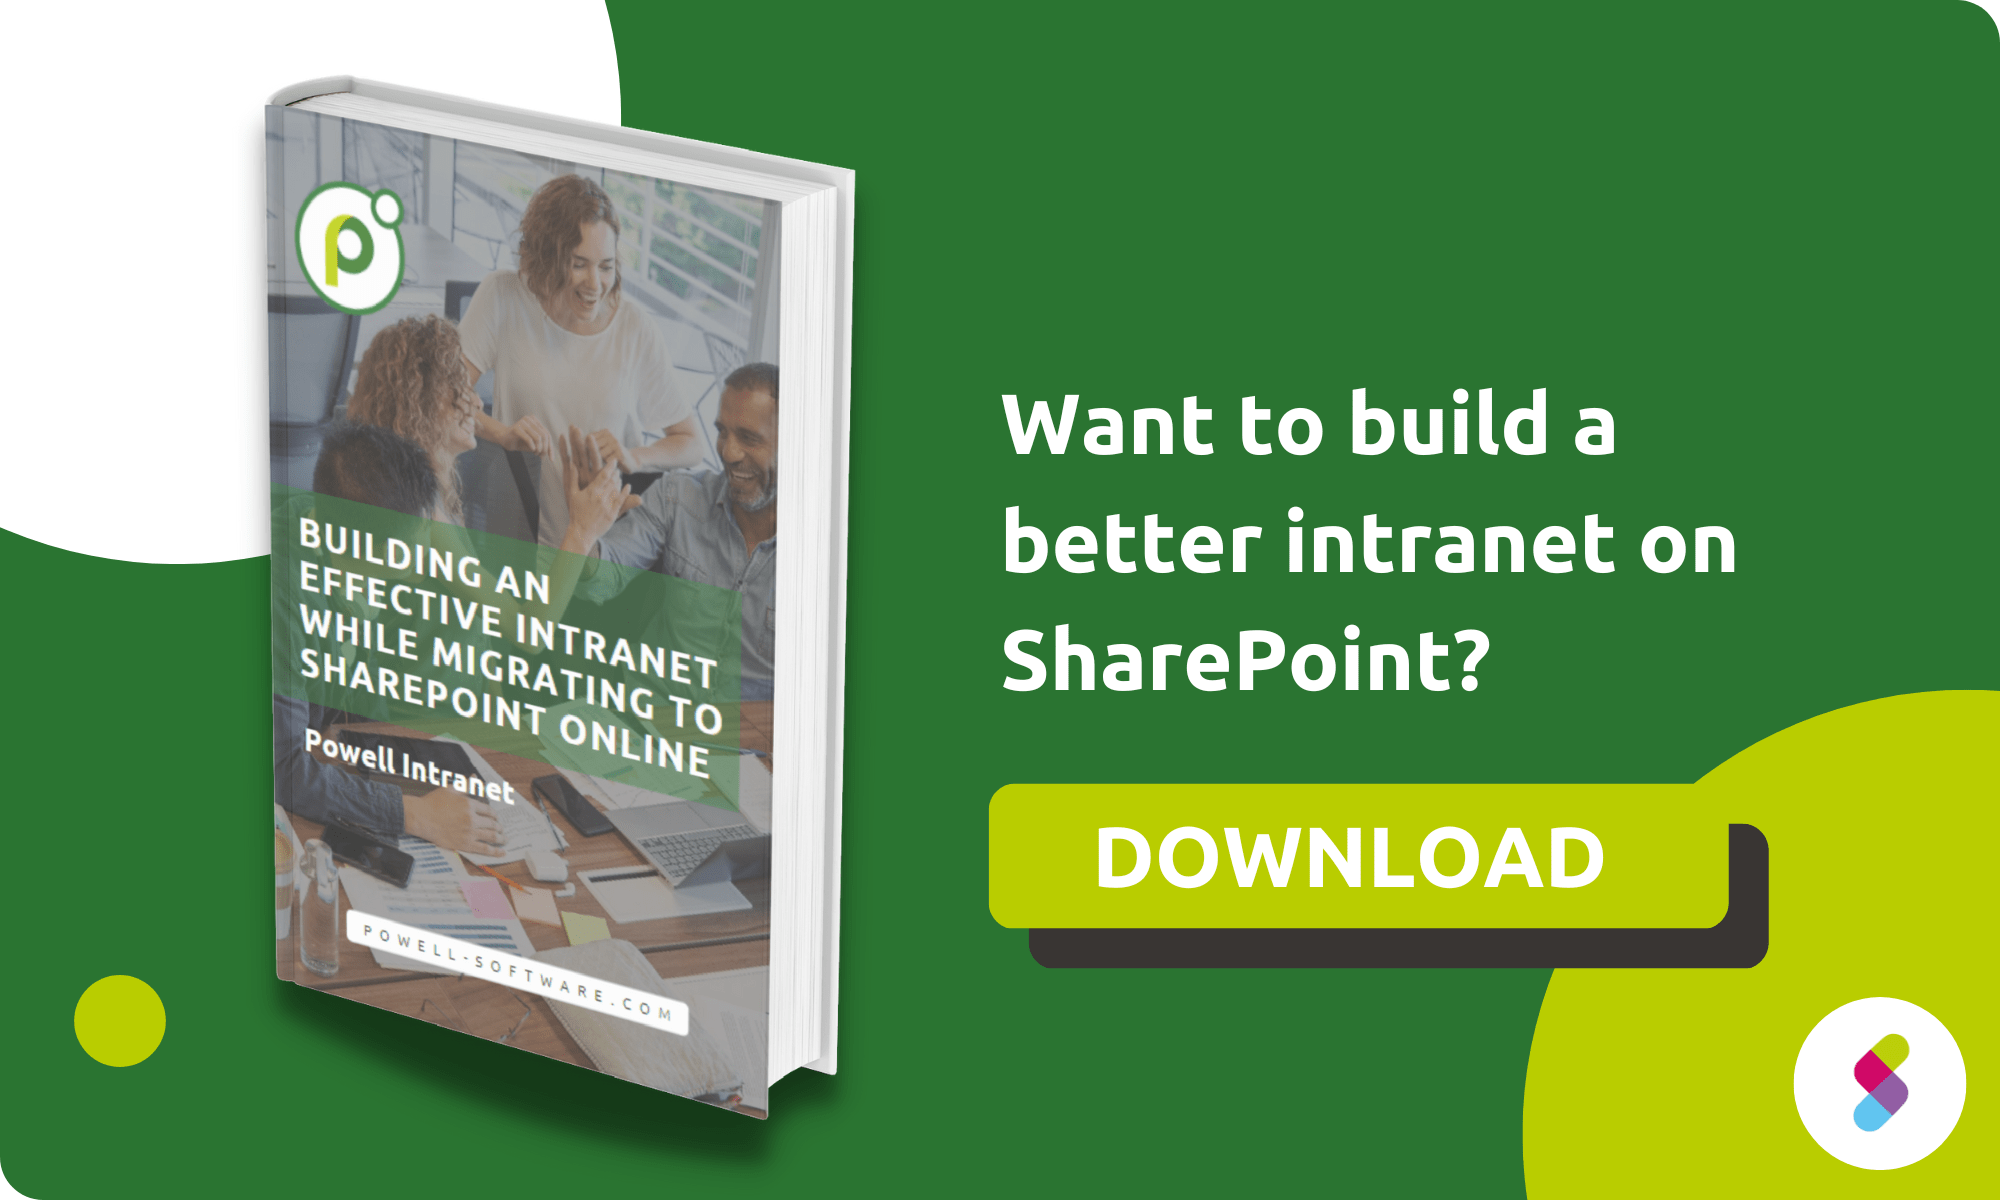 Building an Efective Intranet while You Migrate to SharePoint Online